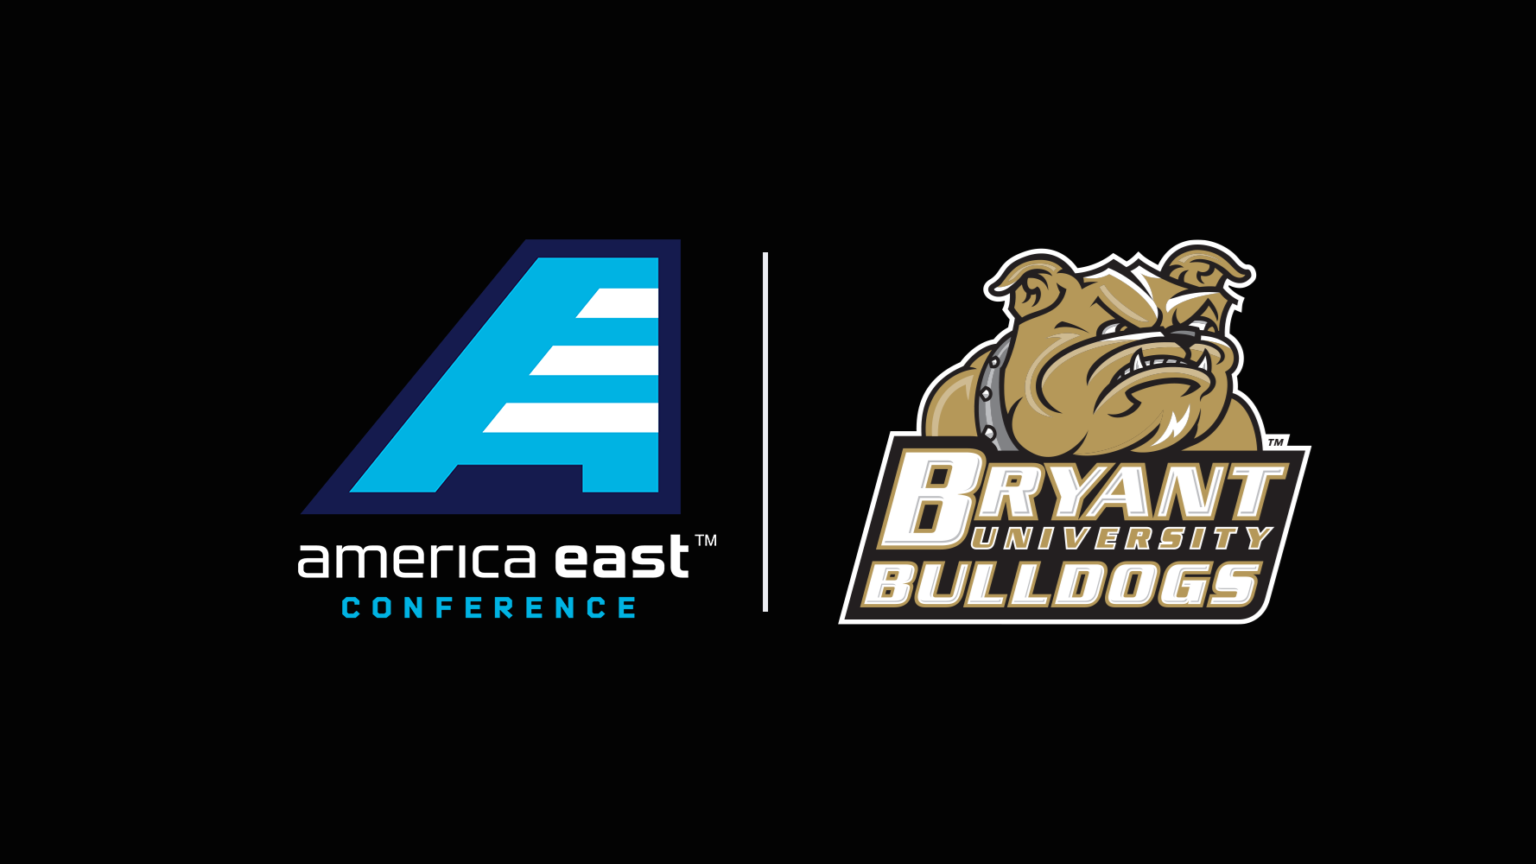 America East to Add Bryant University as Newest Member Institution